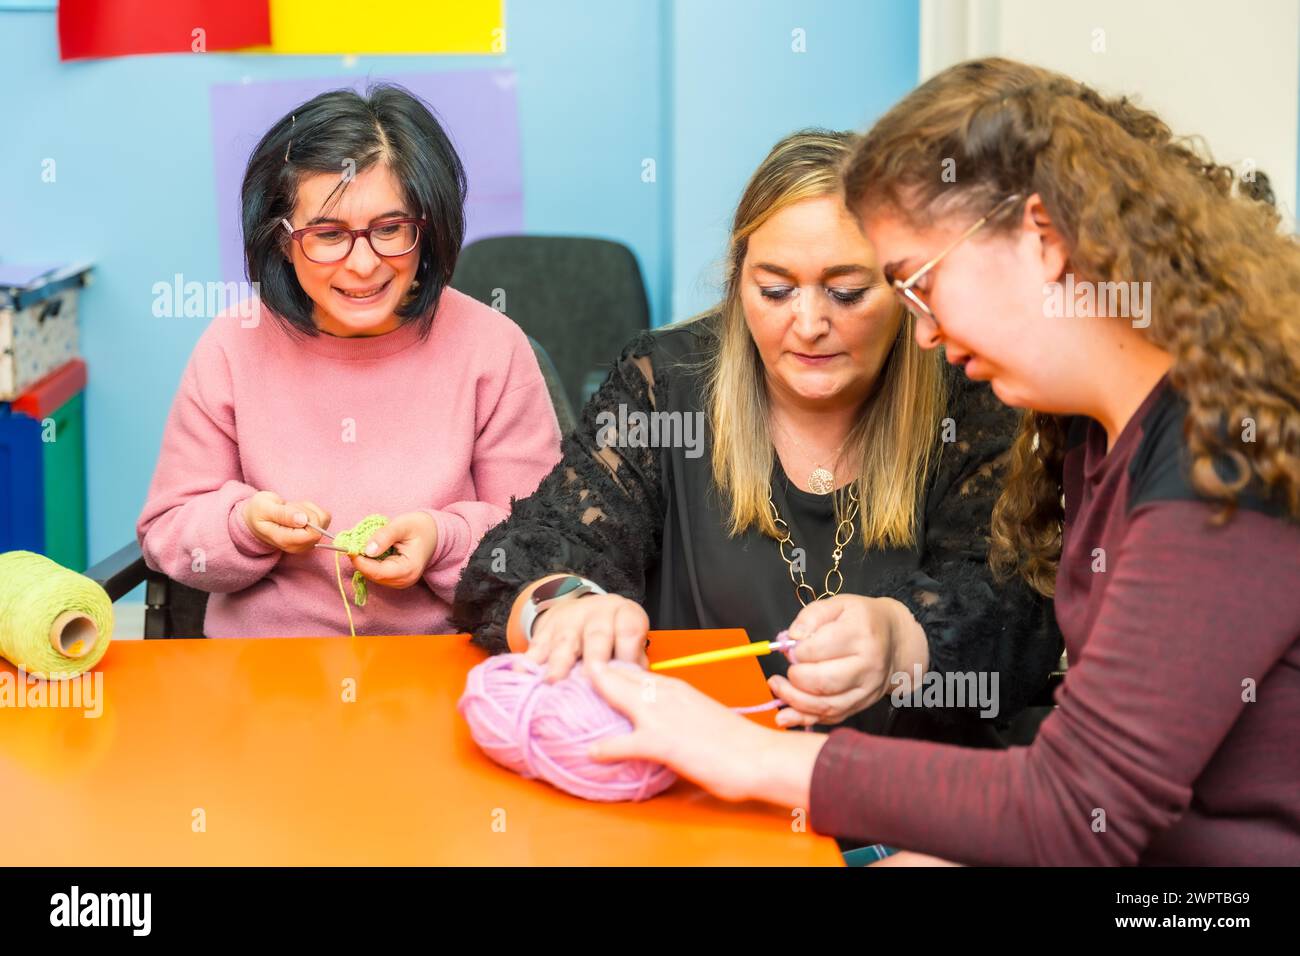 Women with intellectual disabilities and teacher learning how to knit clothes with wool Stock Photo